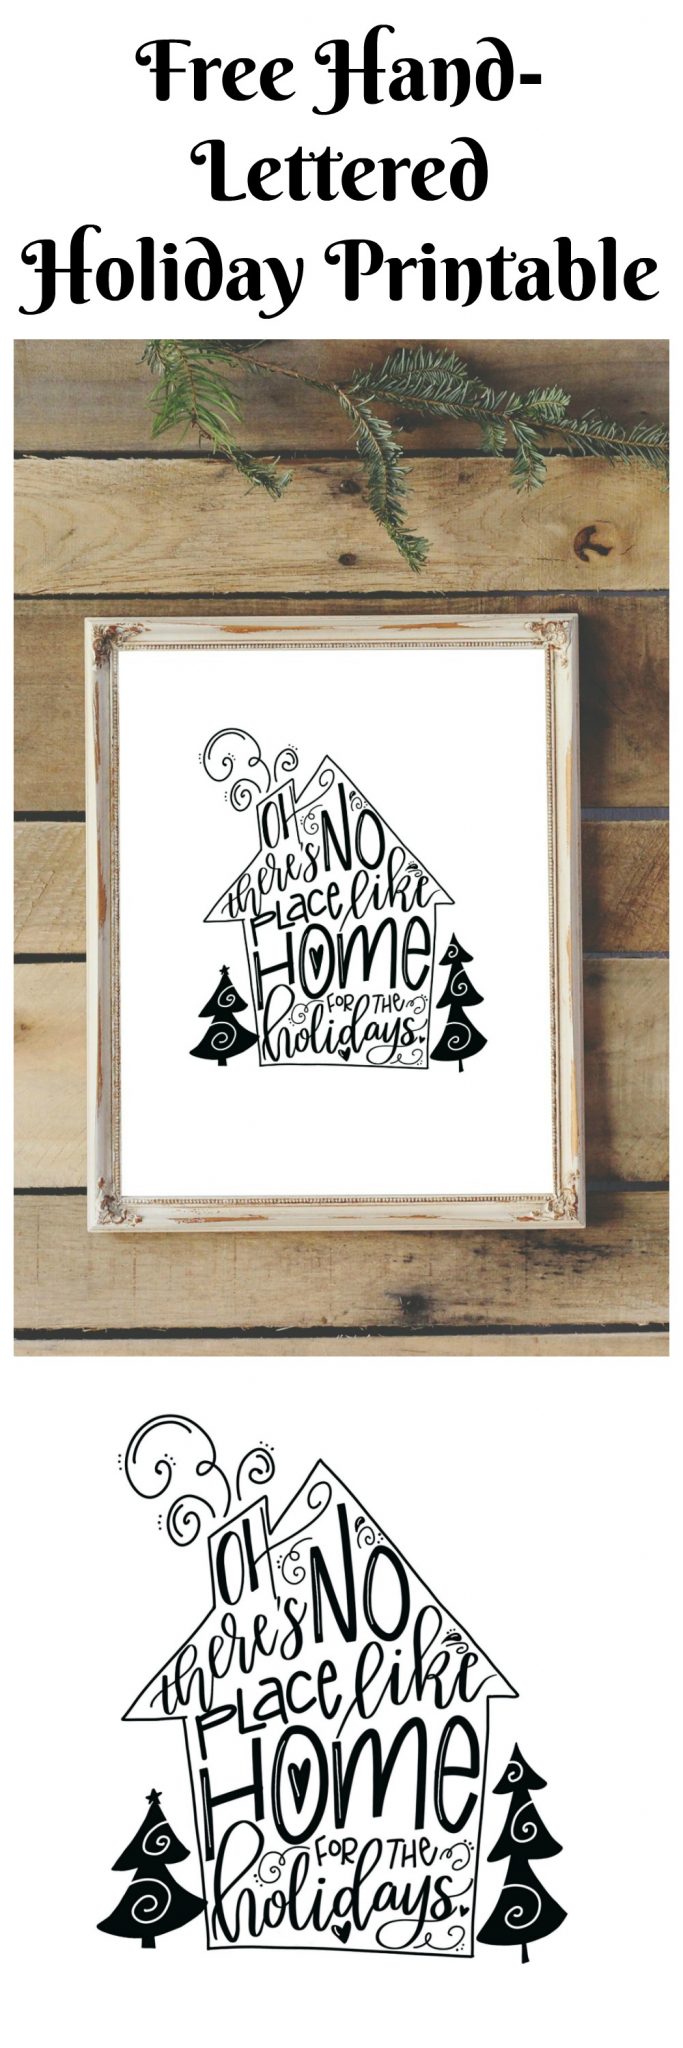 Free Hand-Lettered Holiday Printable